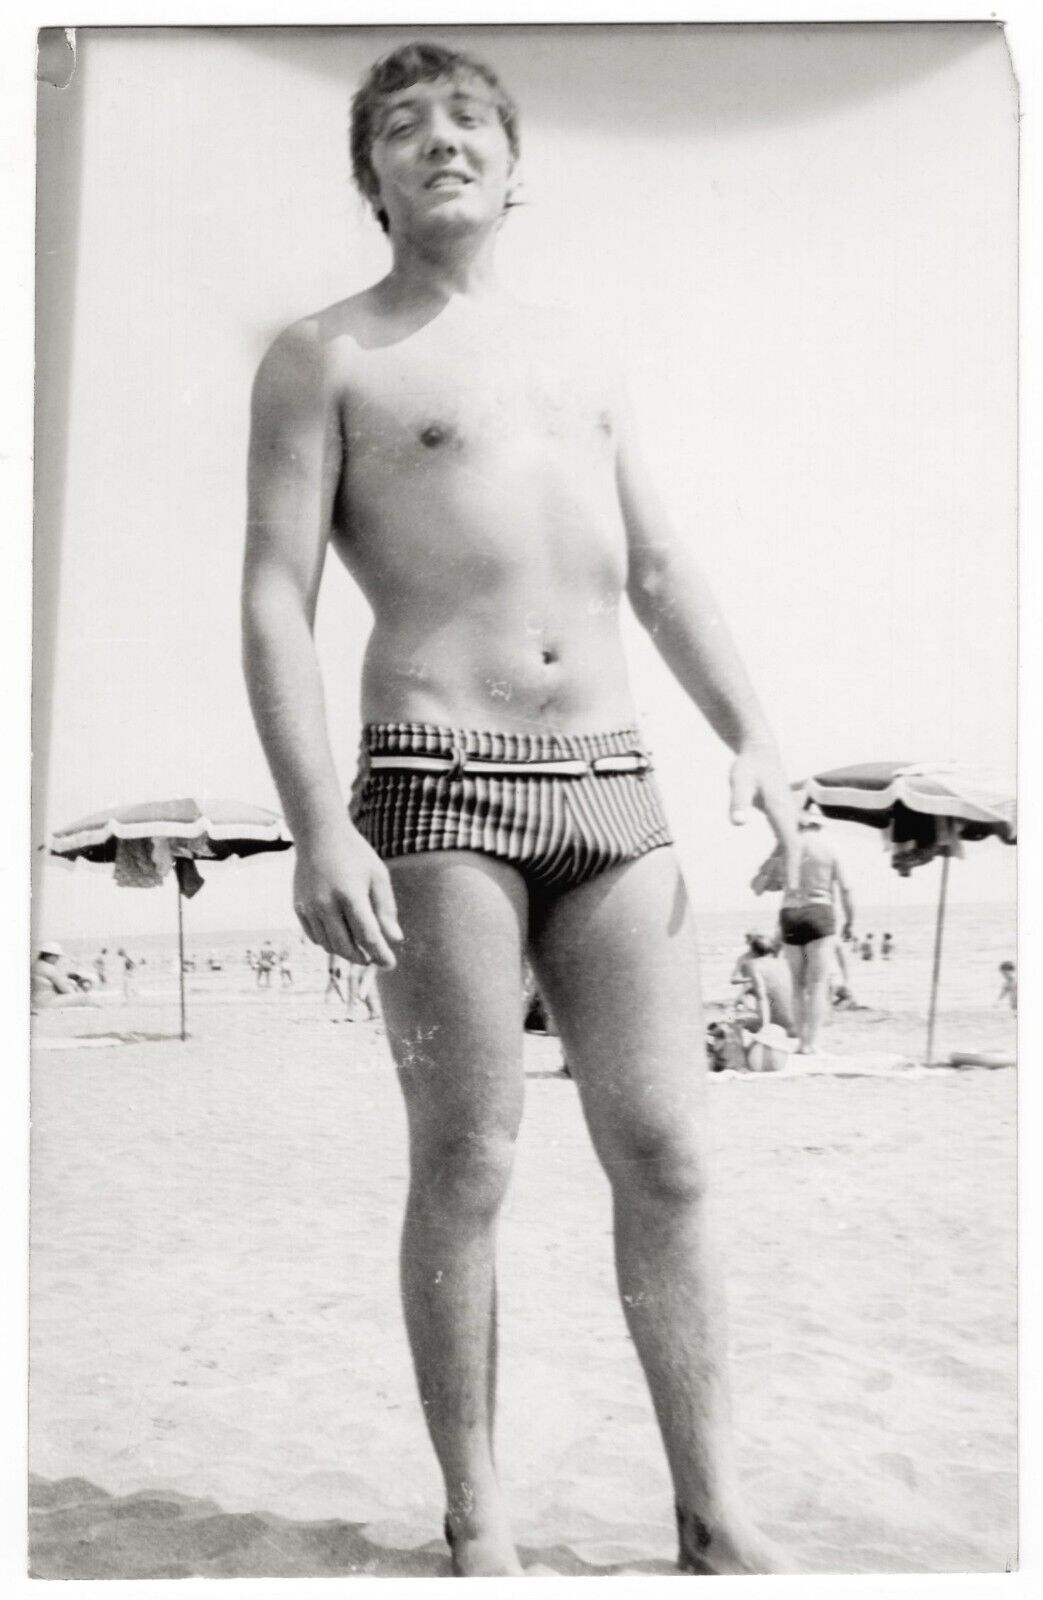 Vintage gay int photo handsome guy slender young man swimming beach bulge +7155